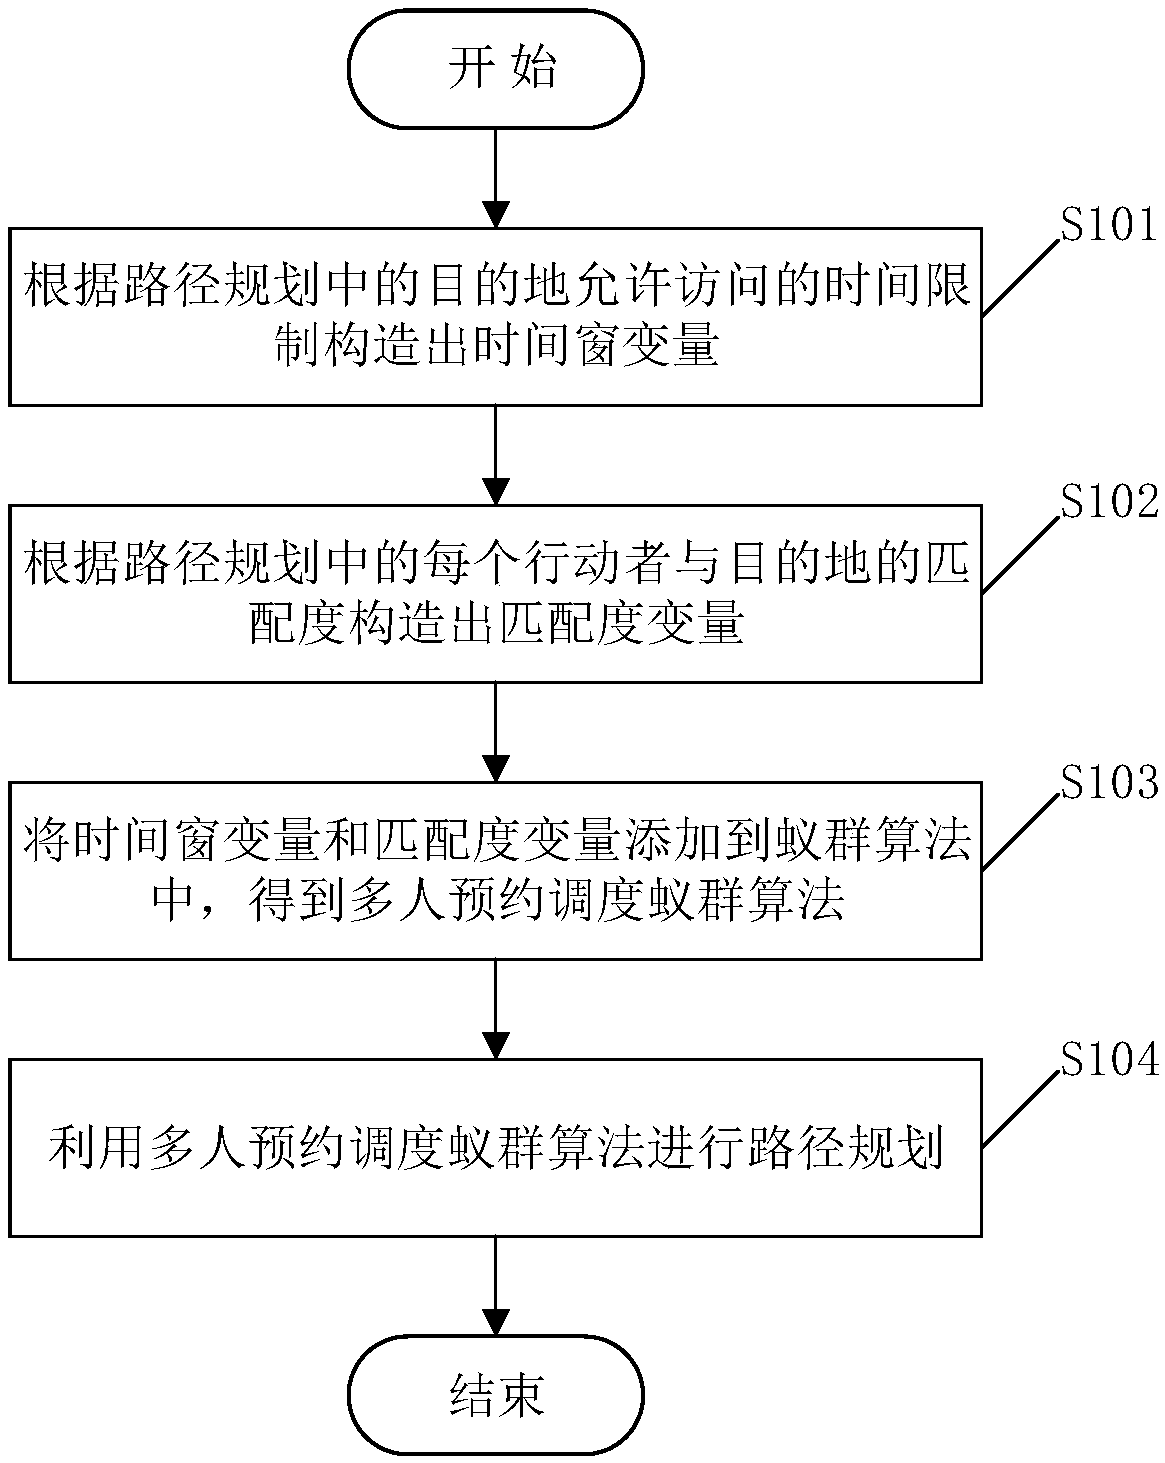 Multi-user reservation scheduling route planning method and relevant device